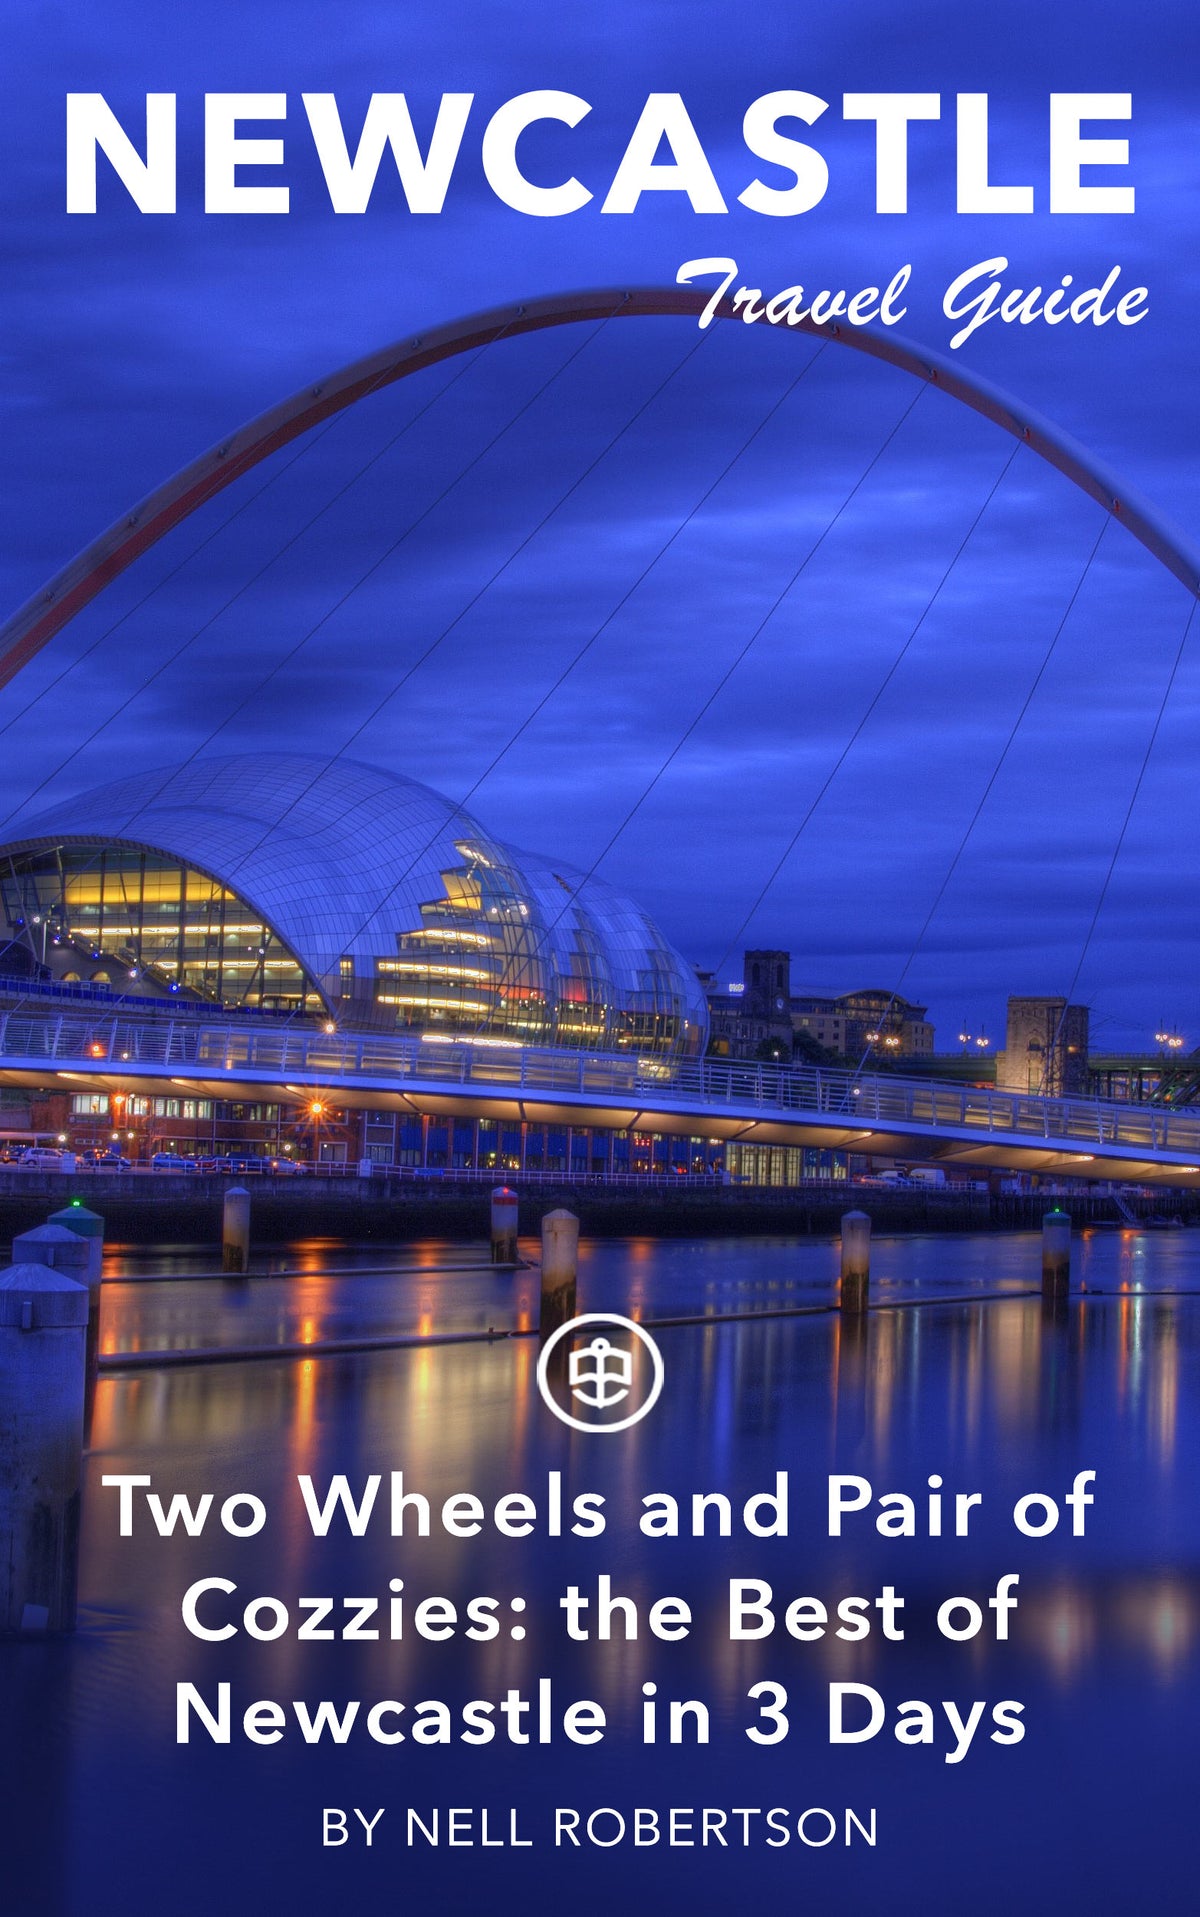 Two Wheels and Pair of Cozzies: the Best of Newcastle in 3 Days